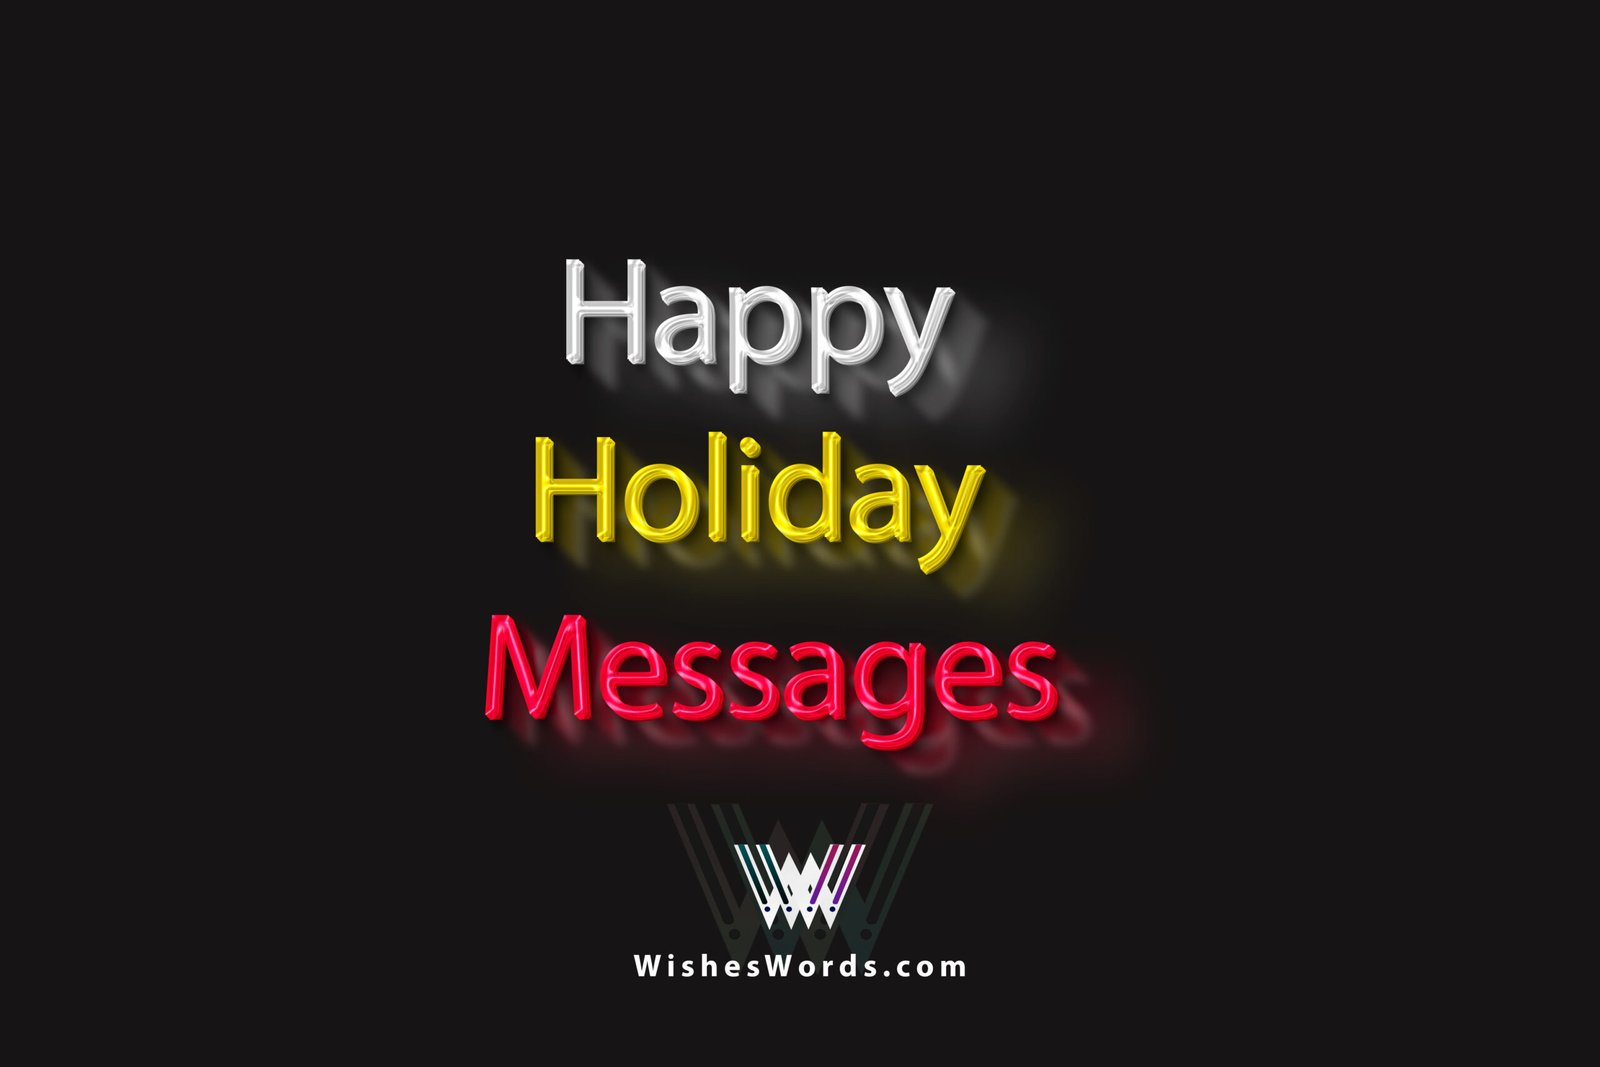 Happy Holiday Messages